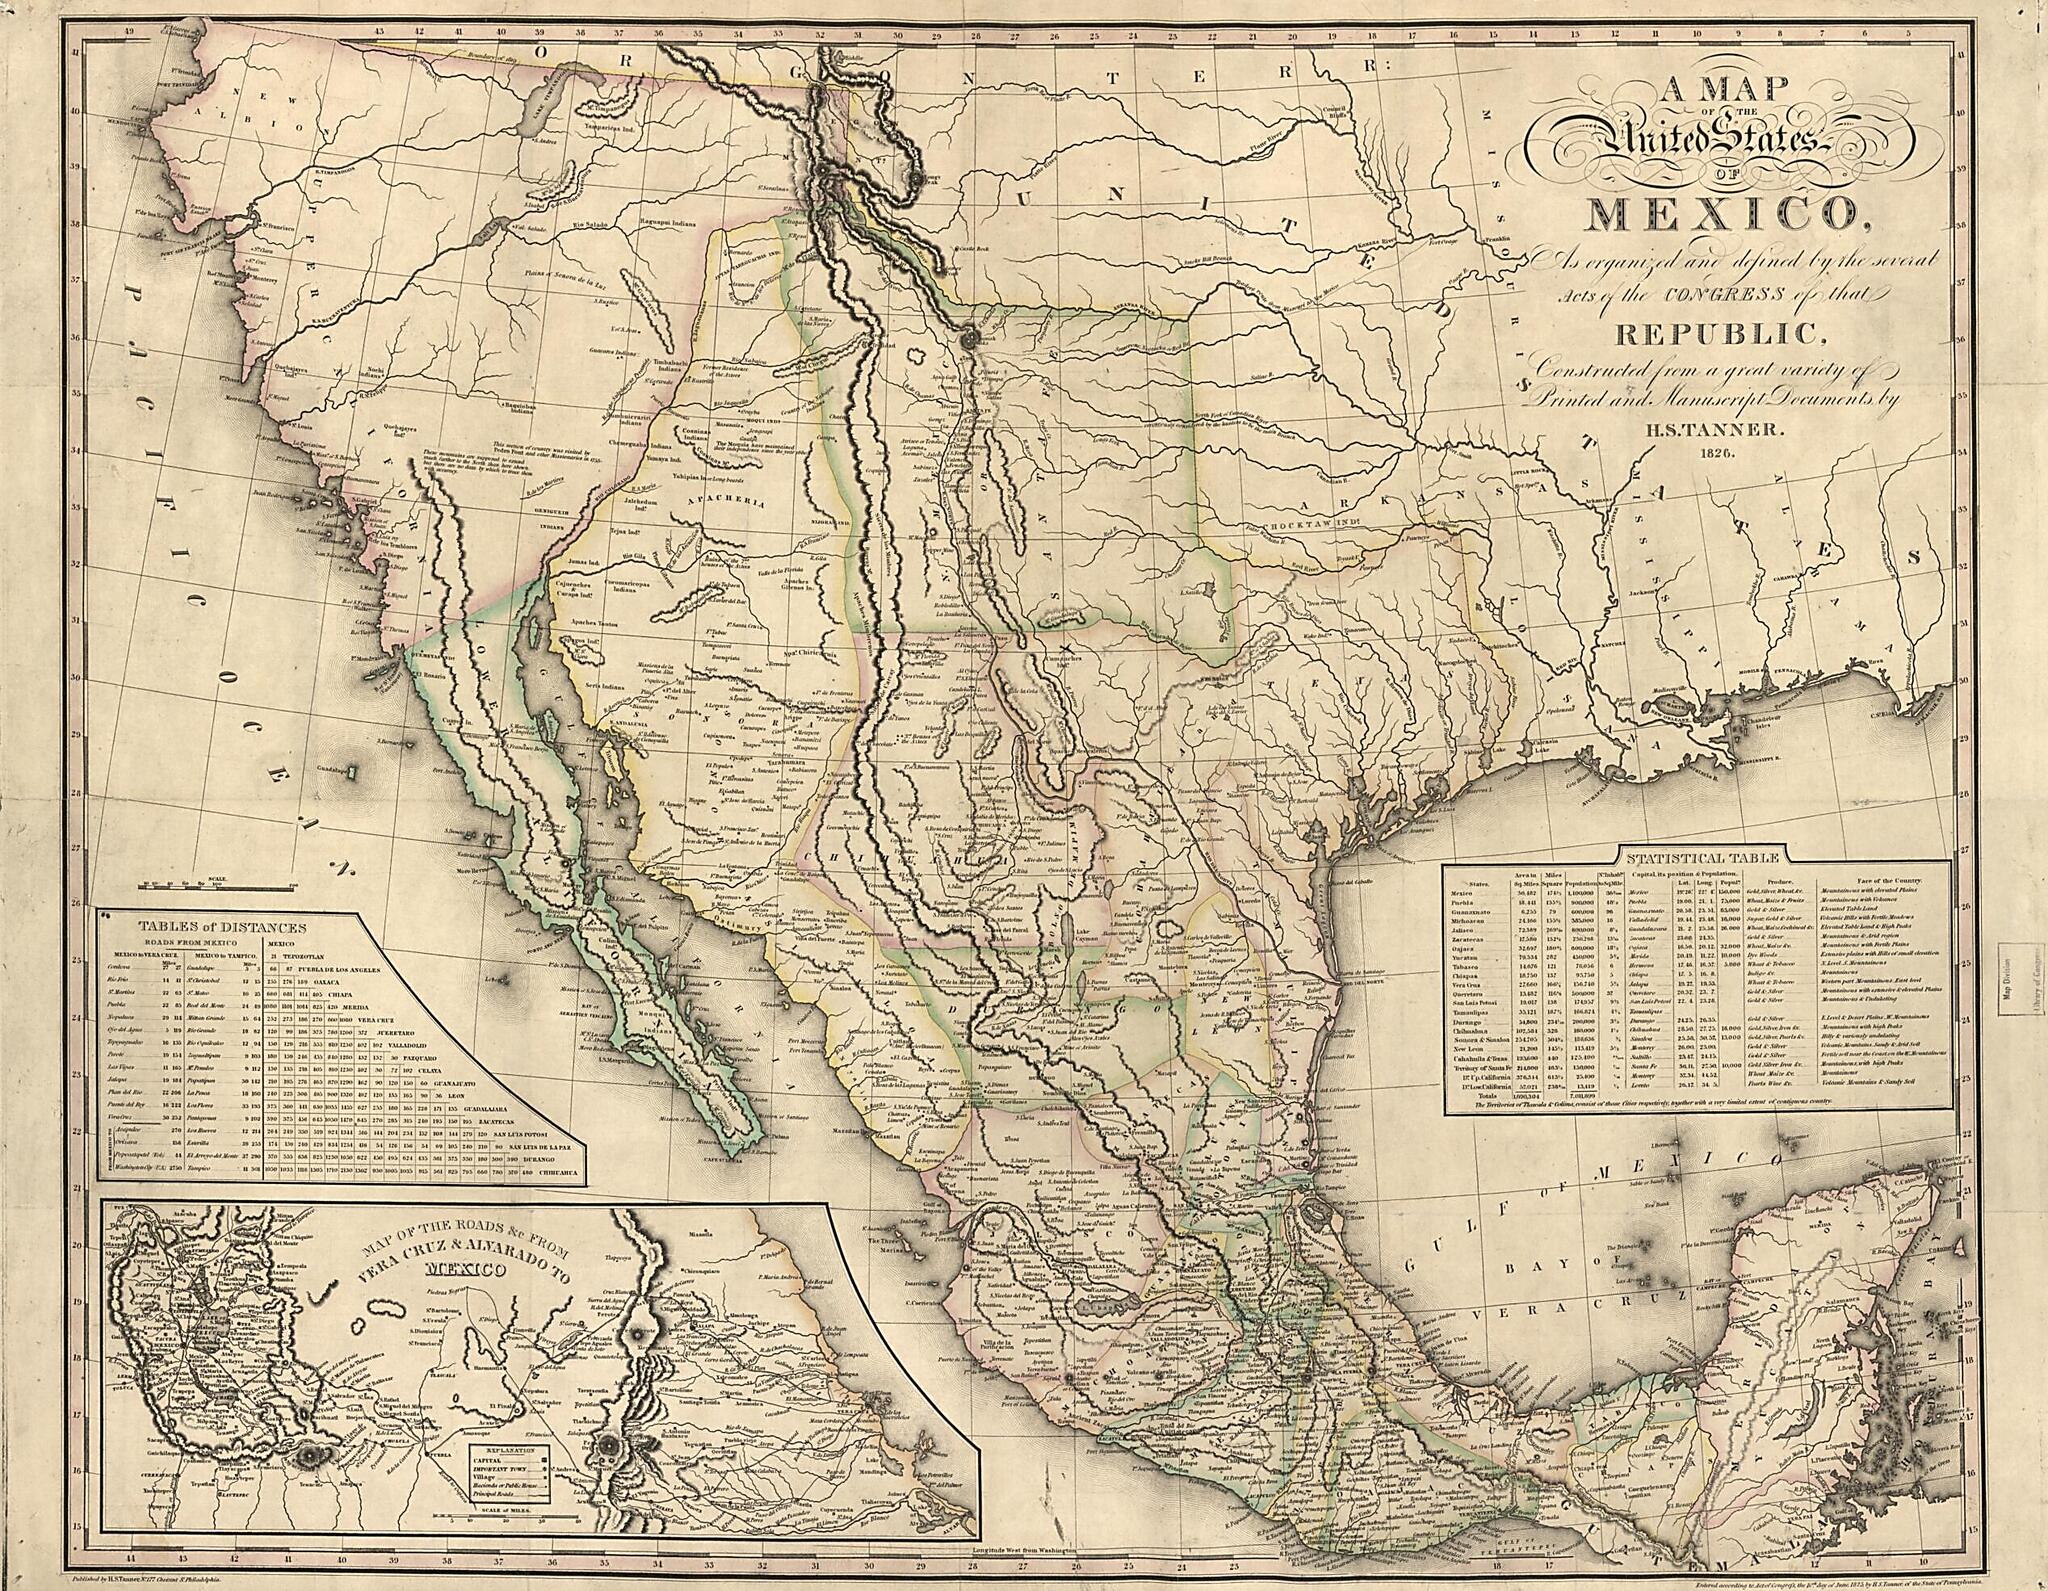 This old map of A Map of the United States of Mexico : As Organized and Defined by the Several Acts of the Congress of That Republic, Constructed from a Great Variety of Printed and Manuscript Documents from 1826 was created by Henry Schenck Tanner in 18